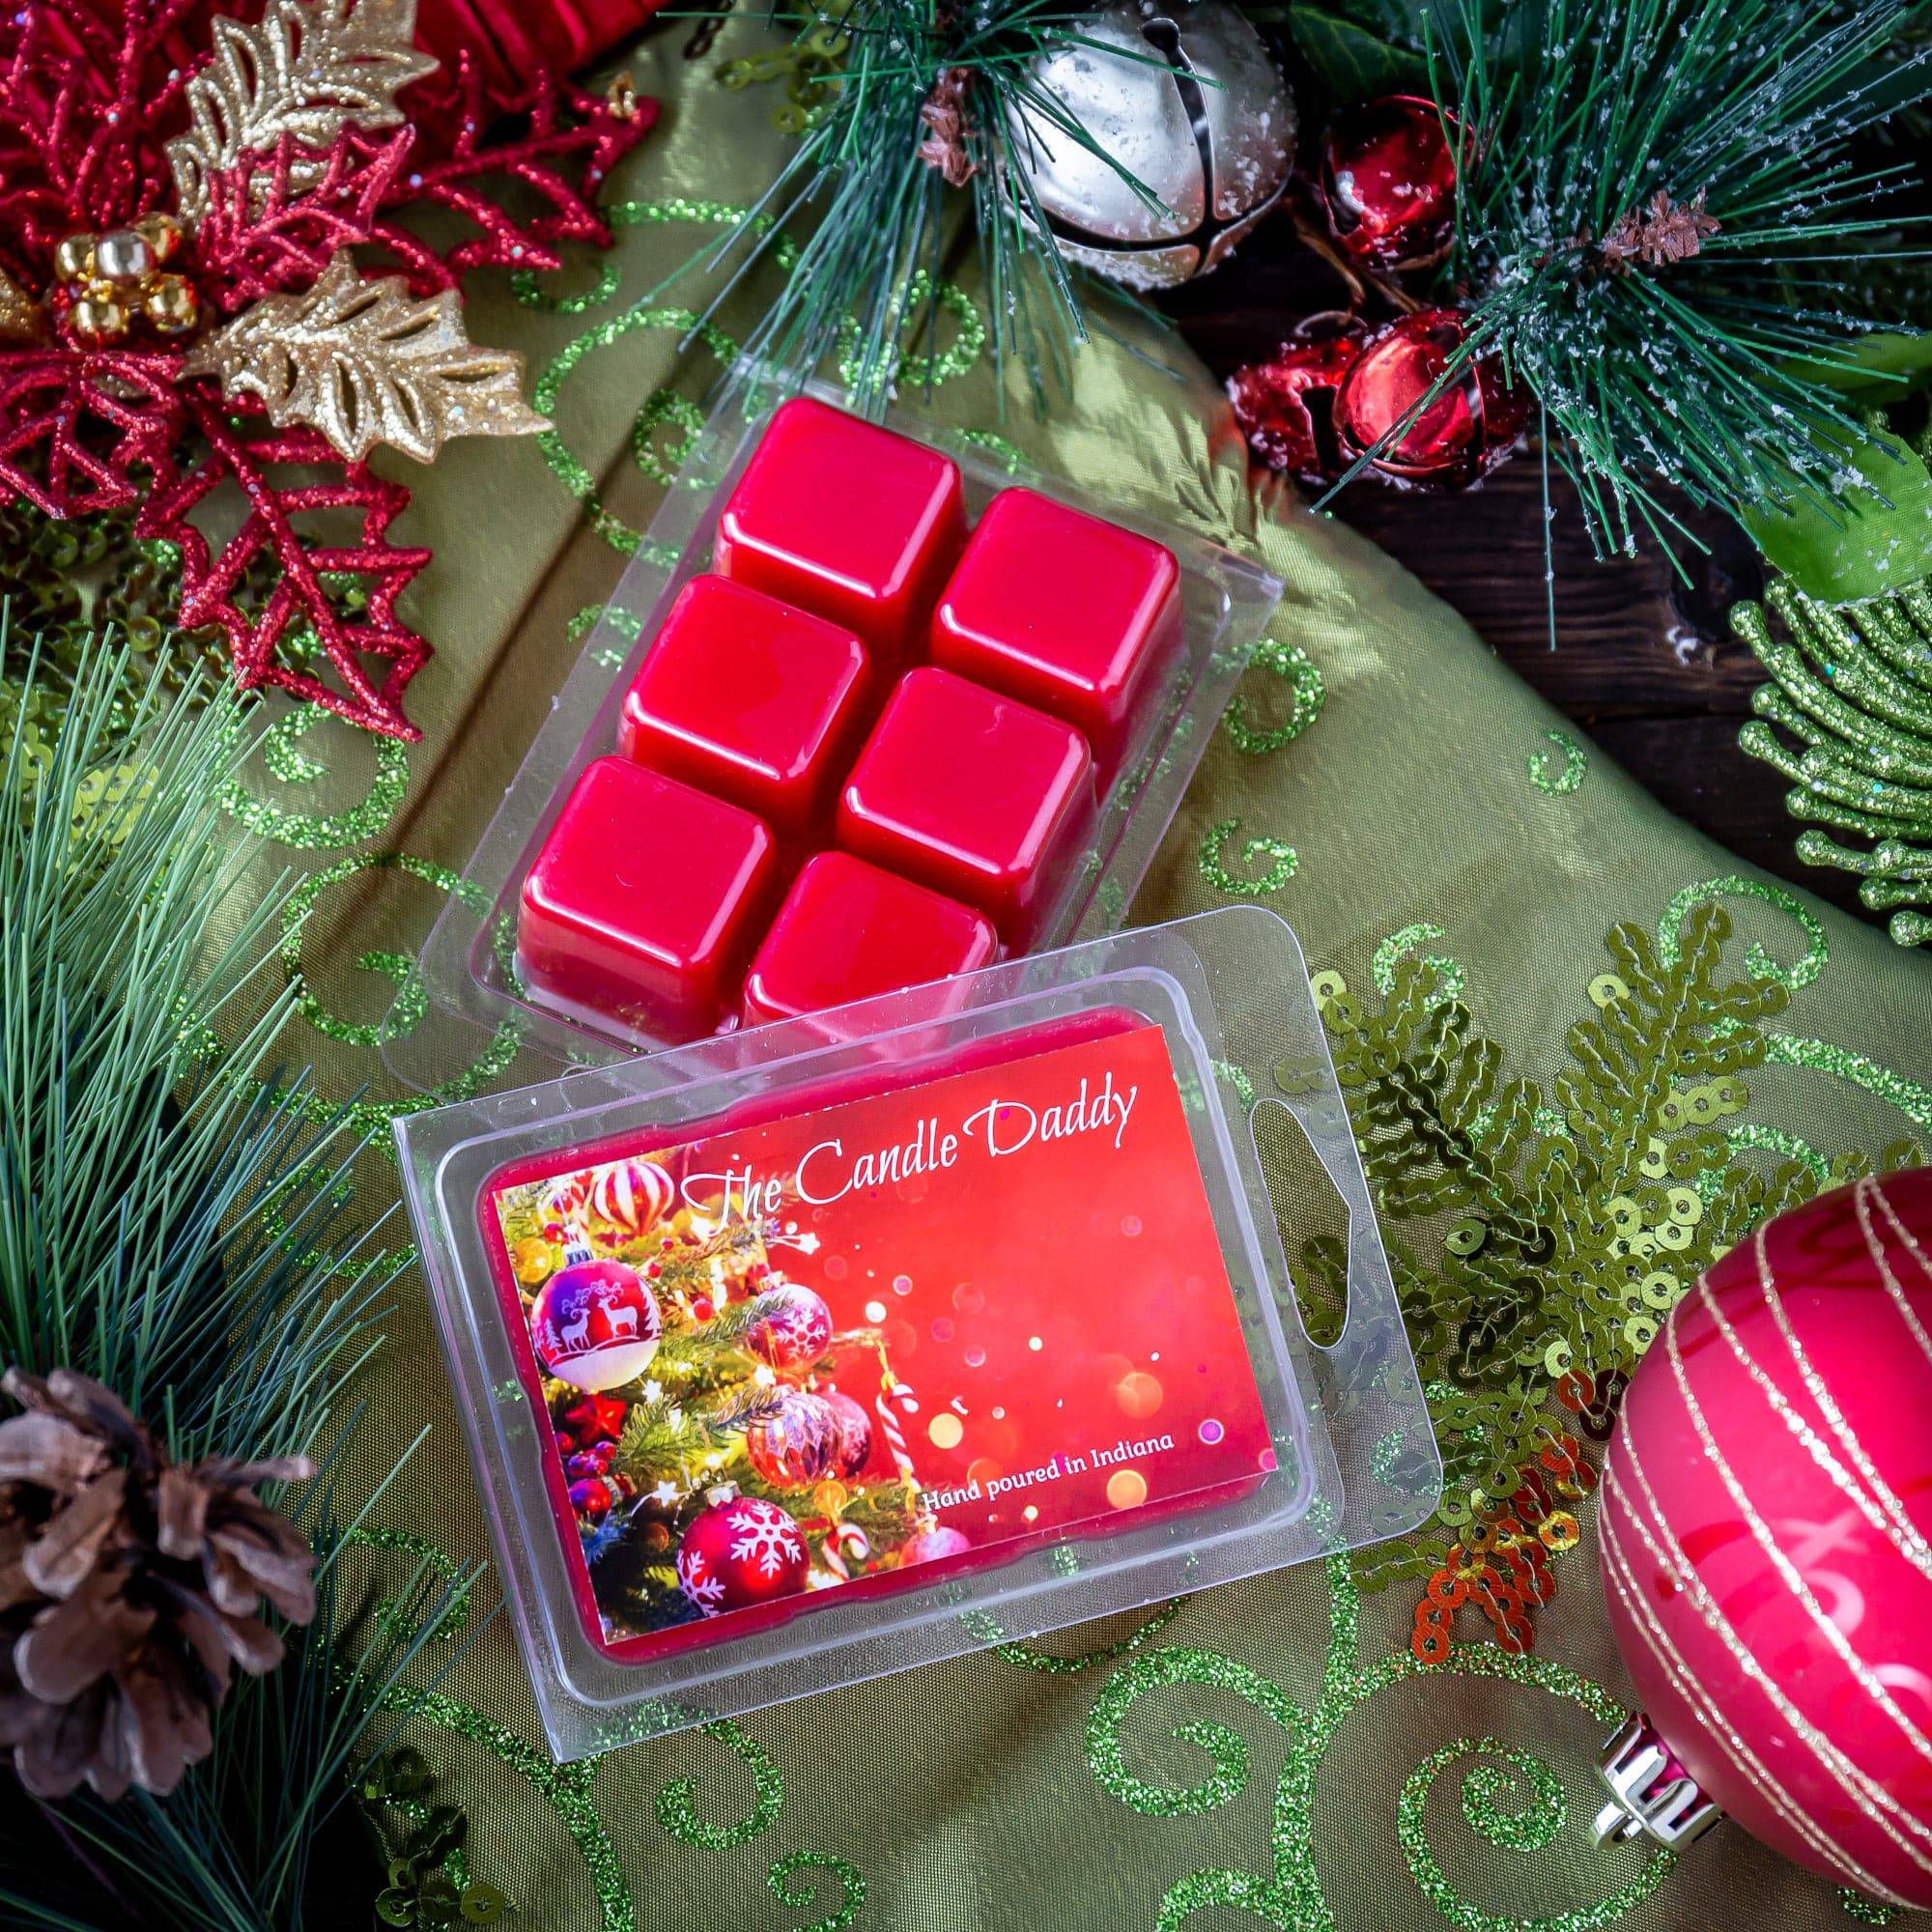 Christmas Tree Scented Wax Melts